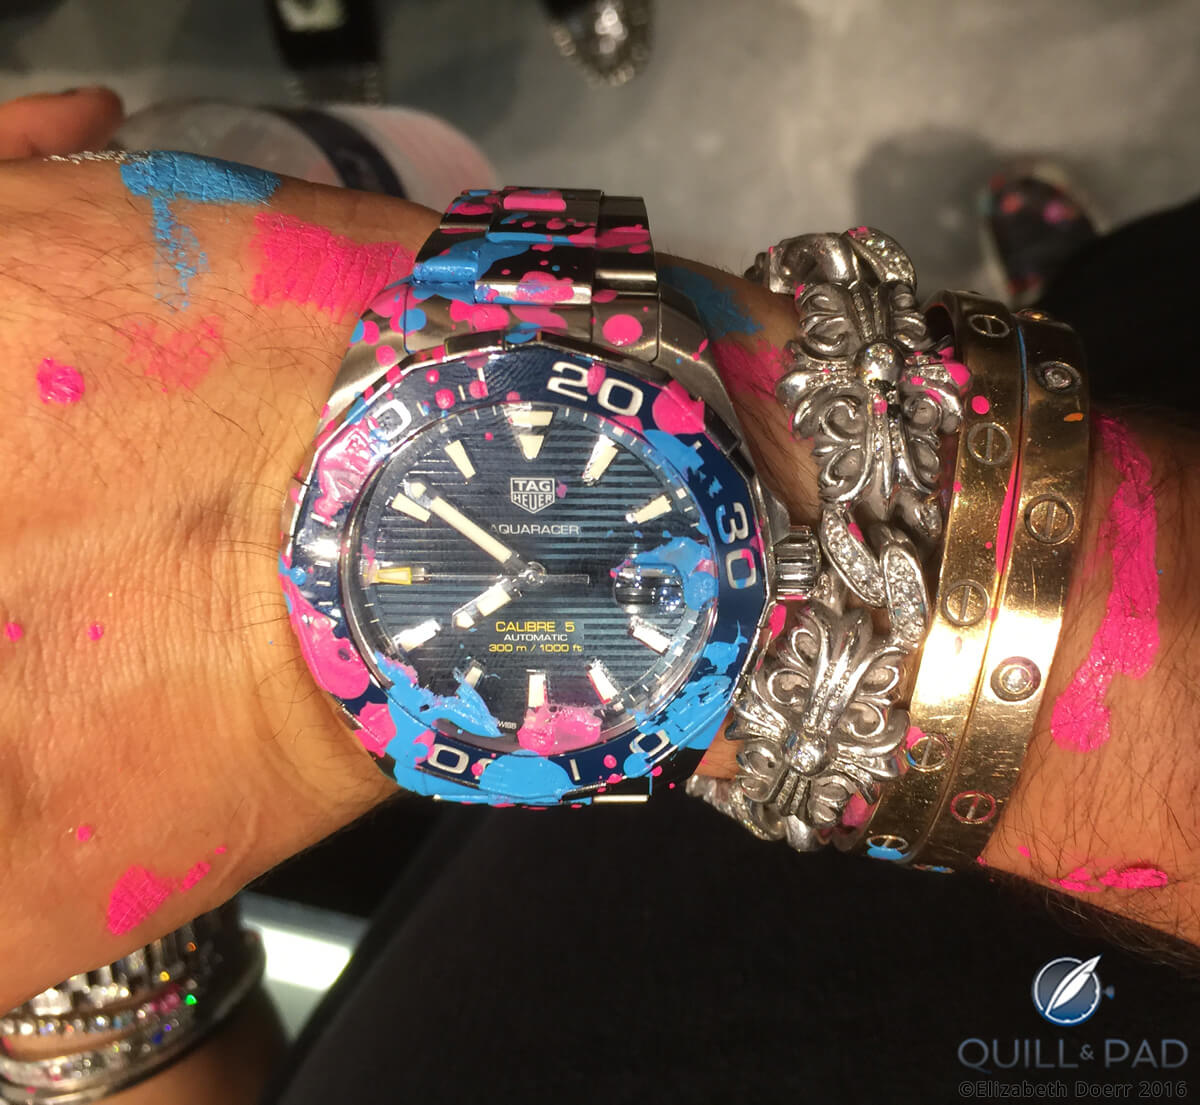 Alec Monopoly’s own TAG Heuer Calibre 5 Aquaracer, which he painted